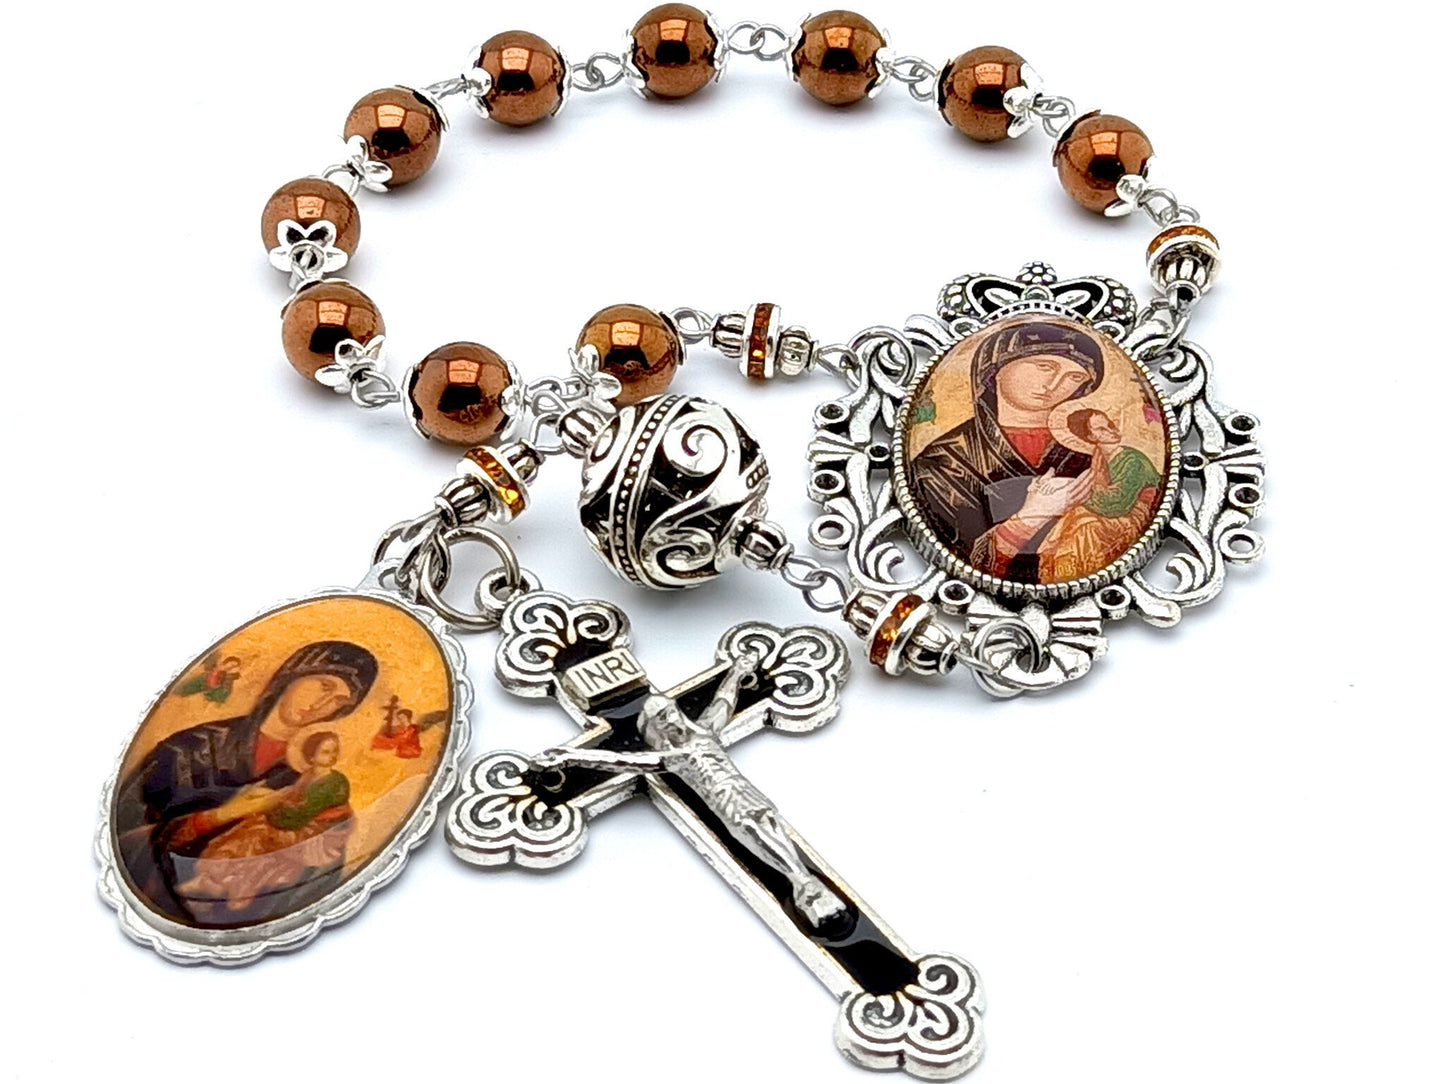 Our Lady of Perpetual Help unique rosary beads single decade rosary with copper hematite gemstone and silver beads, black enamel crucifix and picture centre and end medals.